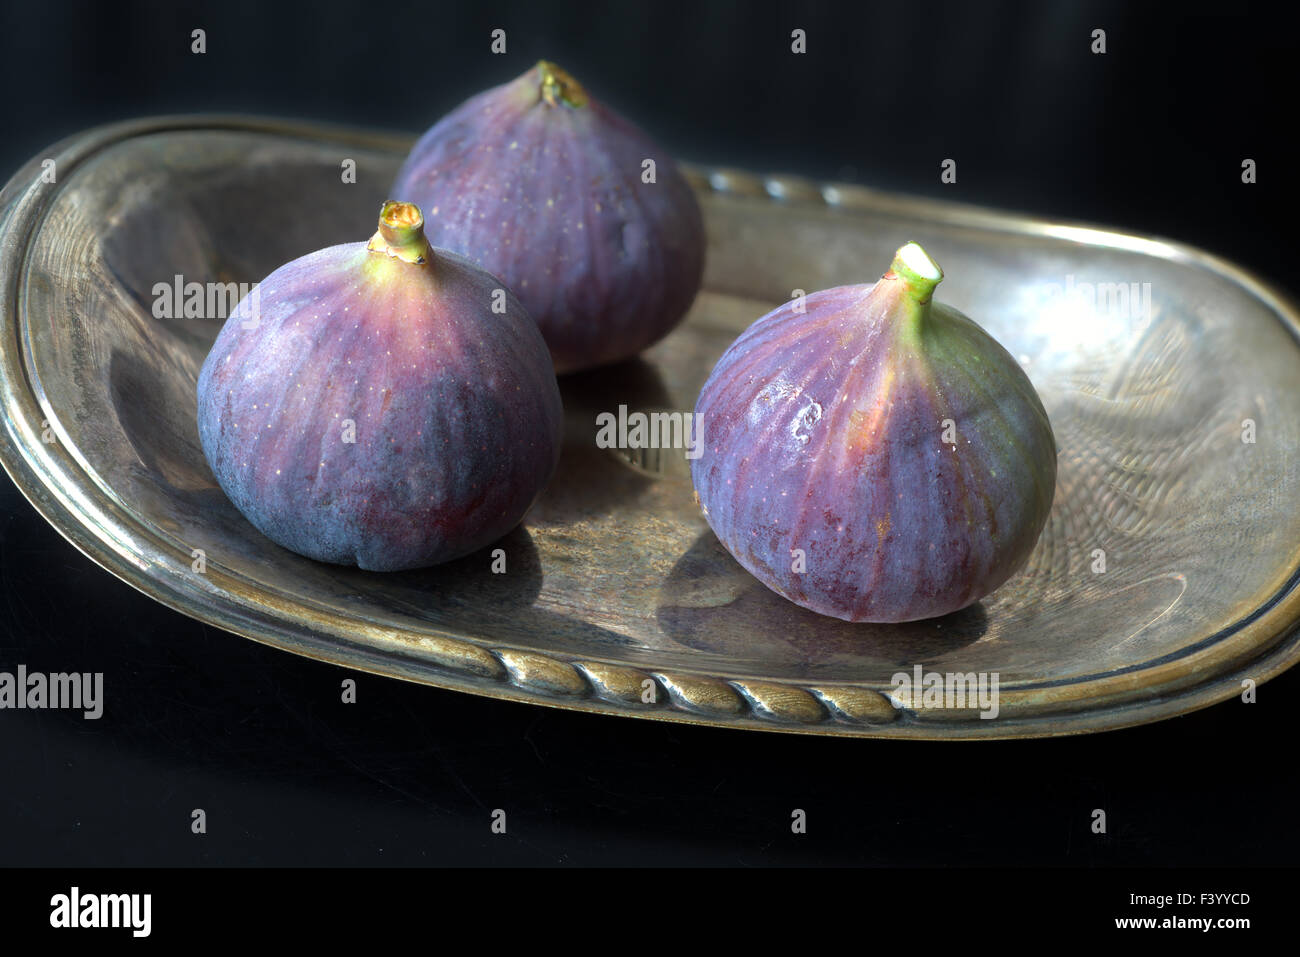 Figs in a silverplate Stock Photo